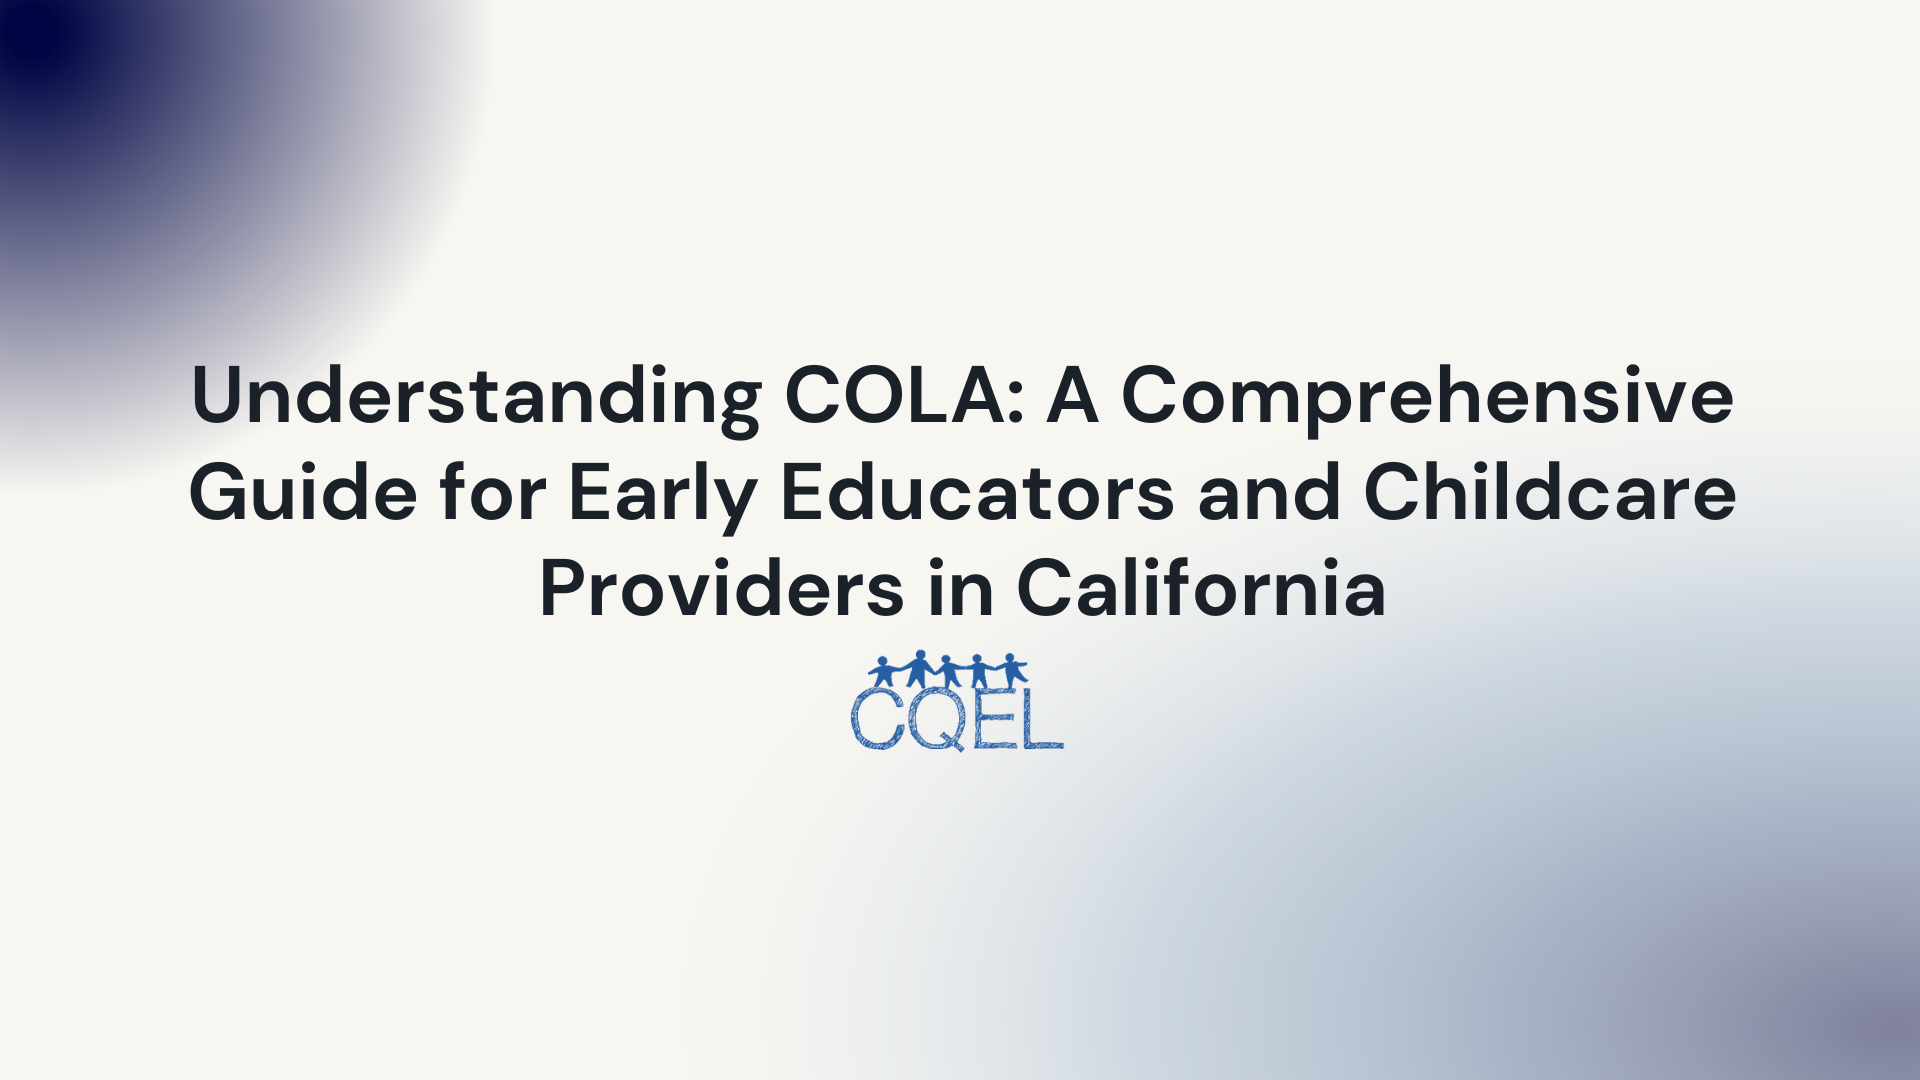 Understanding COLA: A Comprehensive Guide for Early Educators and Childcare Providers in California